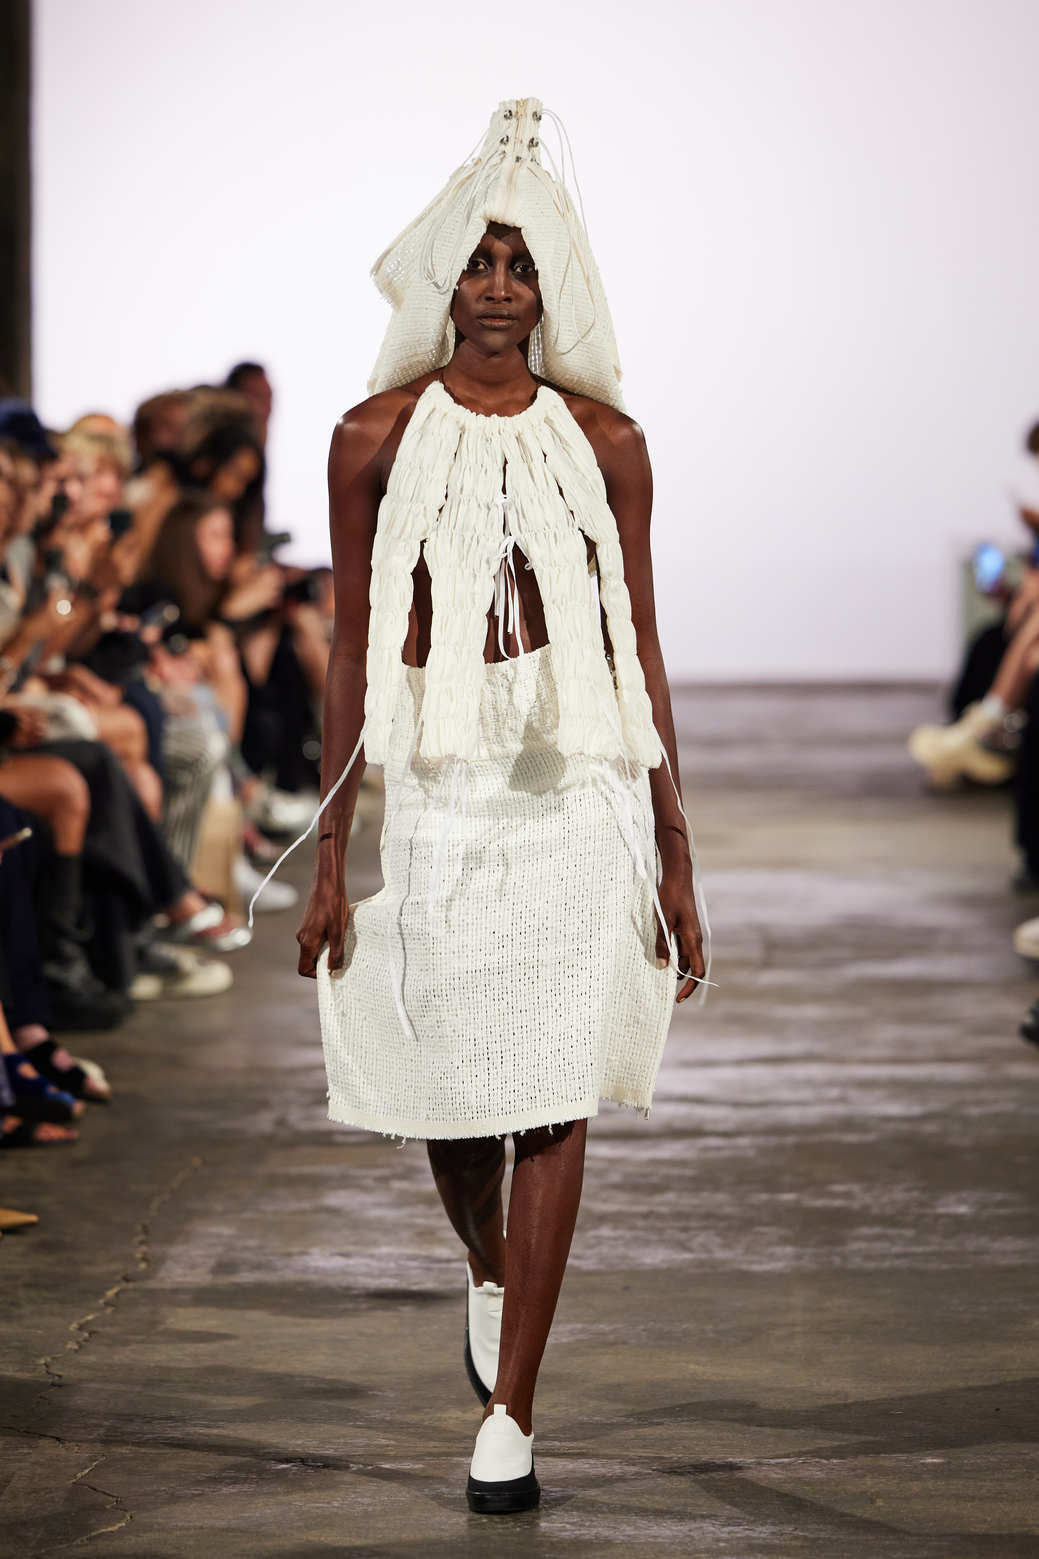 Berlin Fashion Week's biggest trends tap into the past, present, and ...